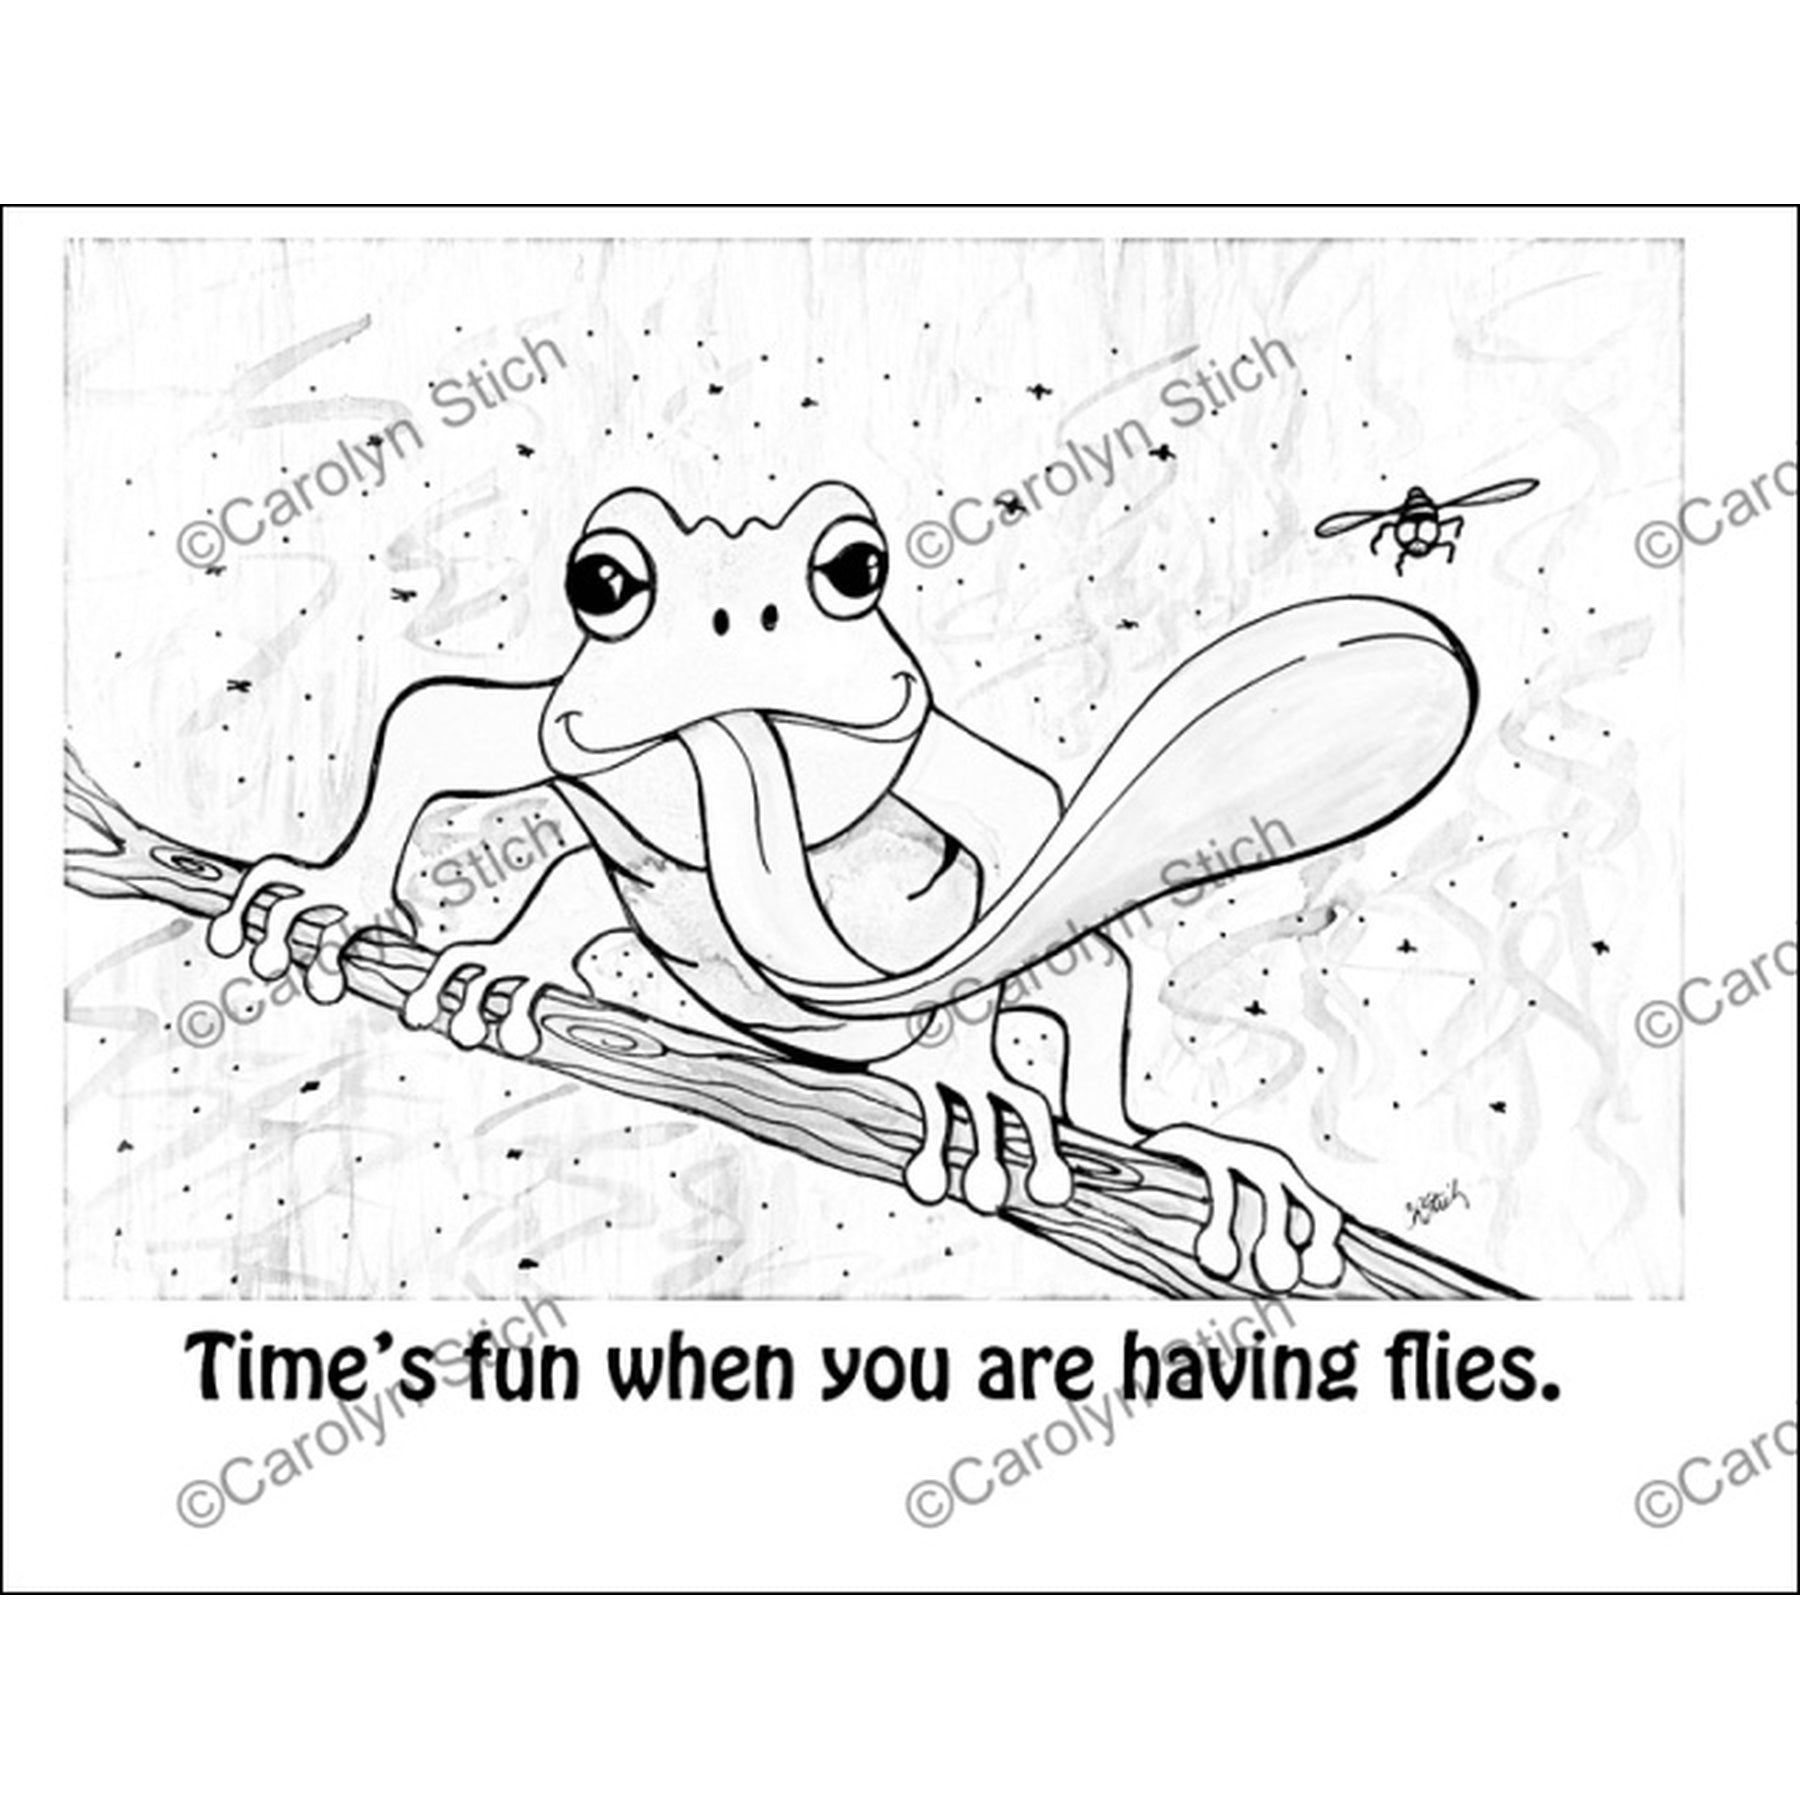 Time's Fun When You Are Having Flies, rug hooking pattern